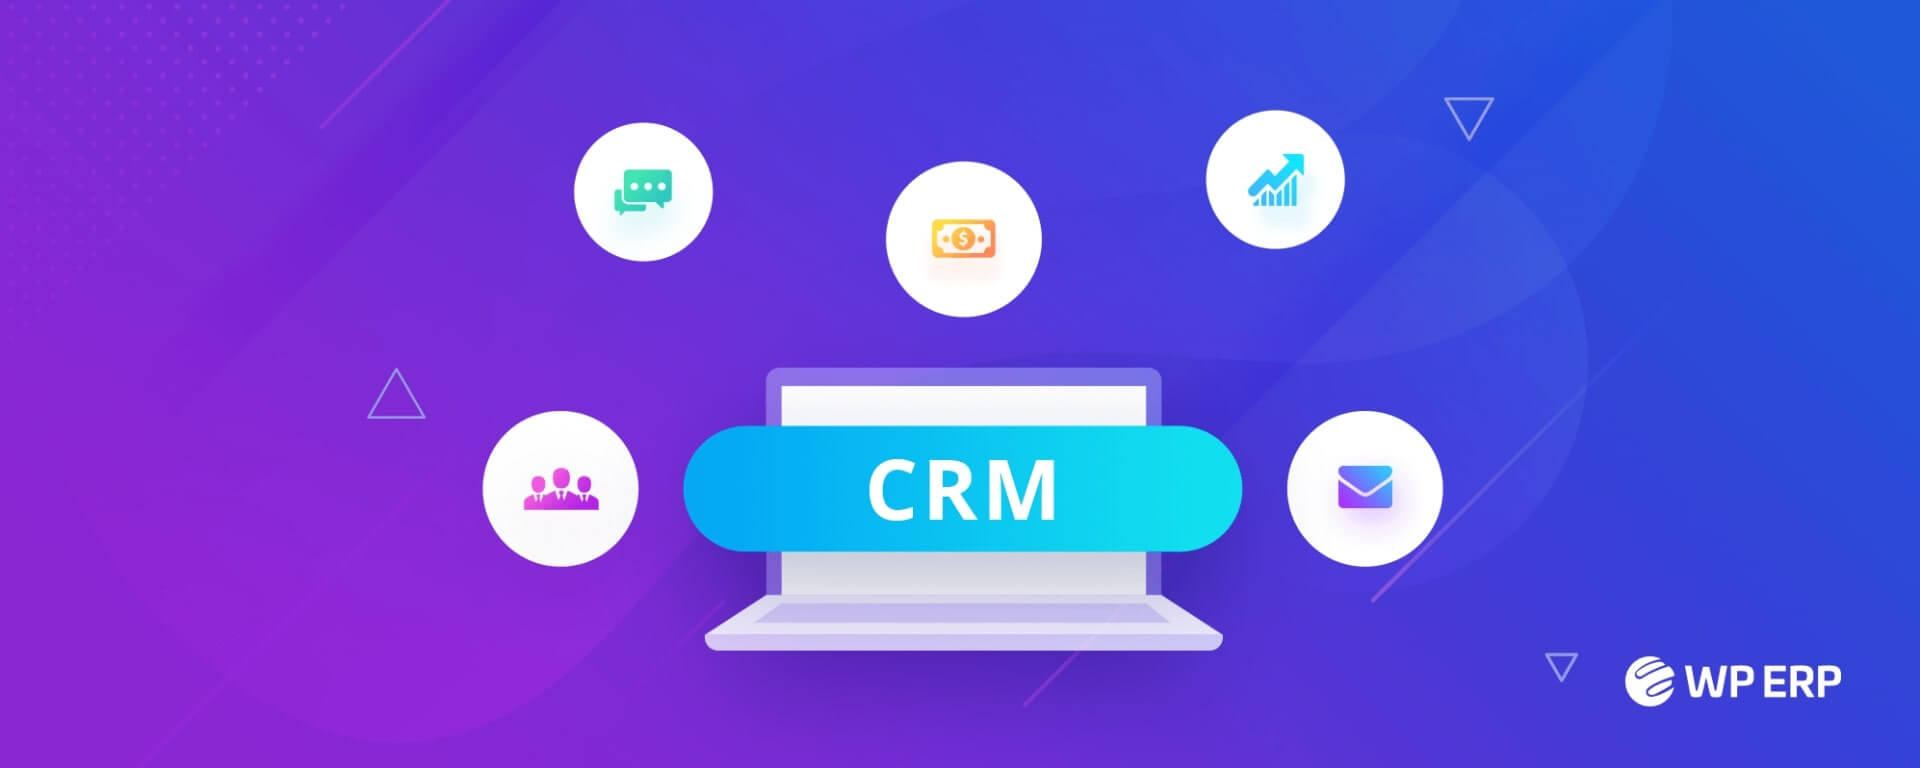 Getting ready for CRM implementation: 14 steps